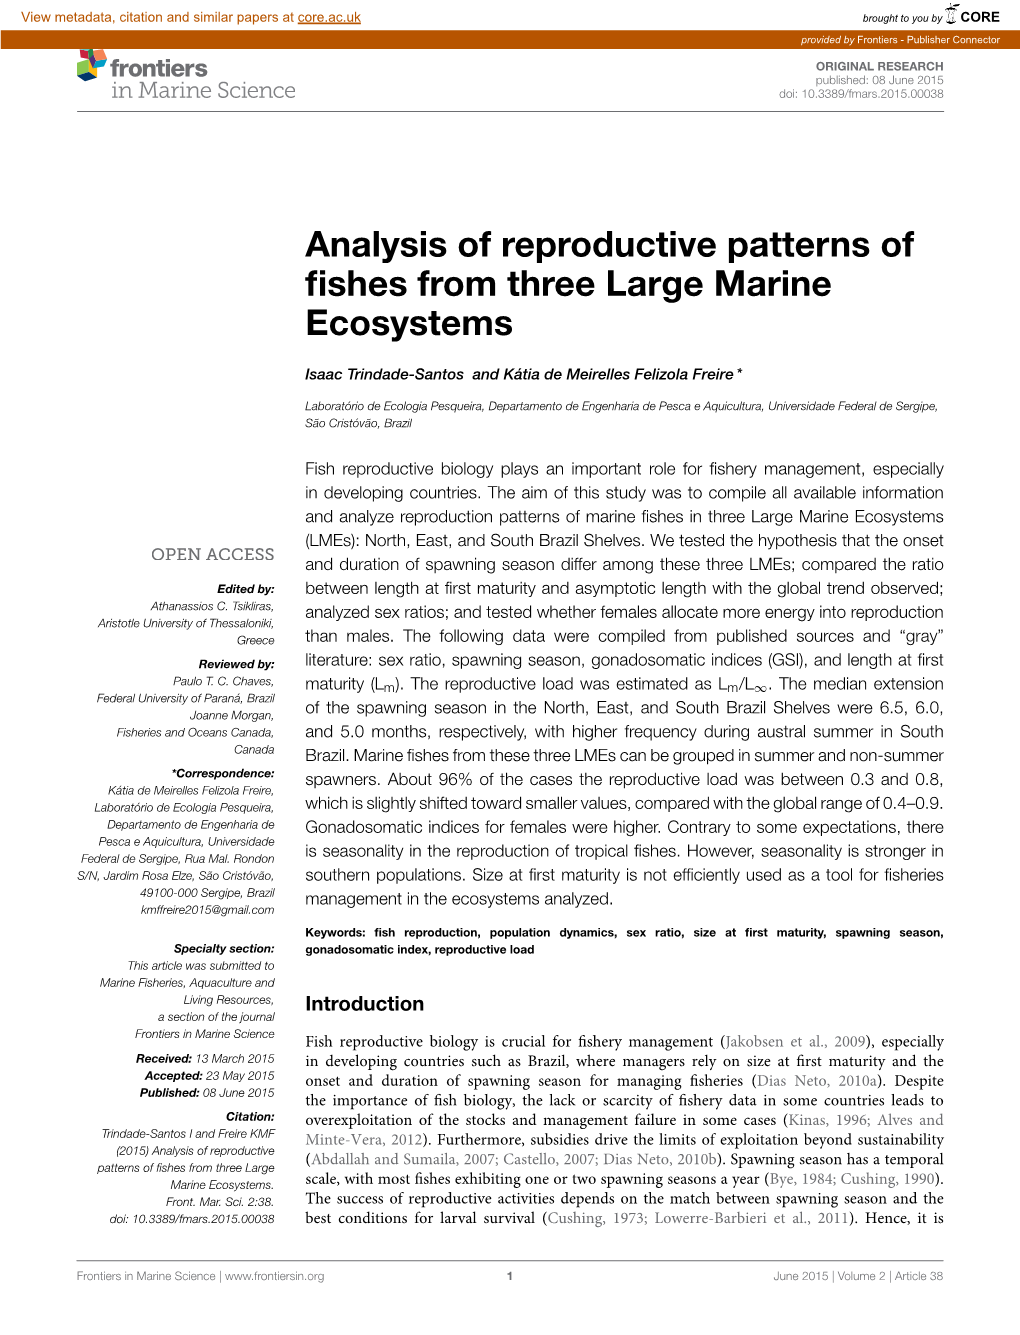 Analysis of Reproductive Patterns of Fishes from Three Large Marine